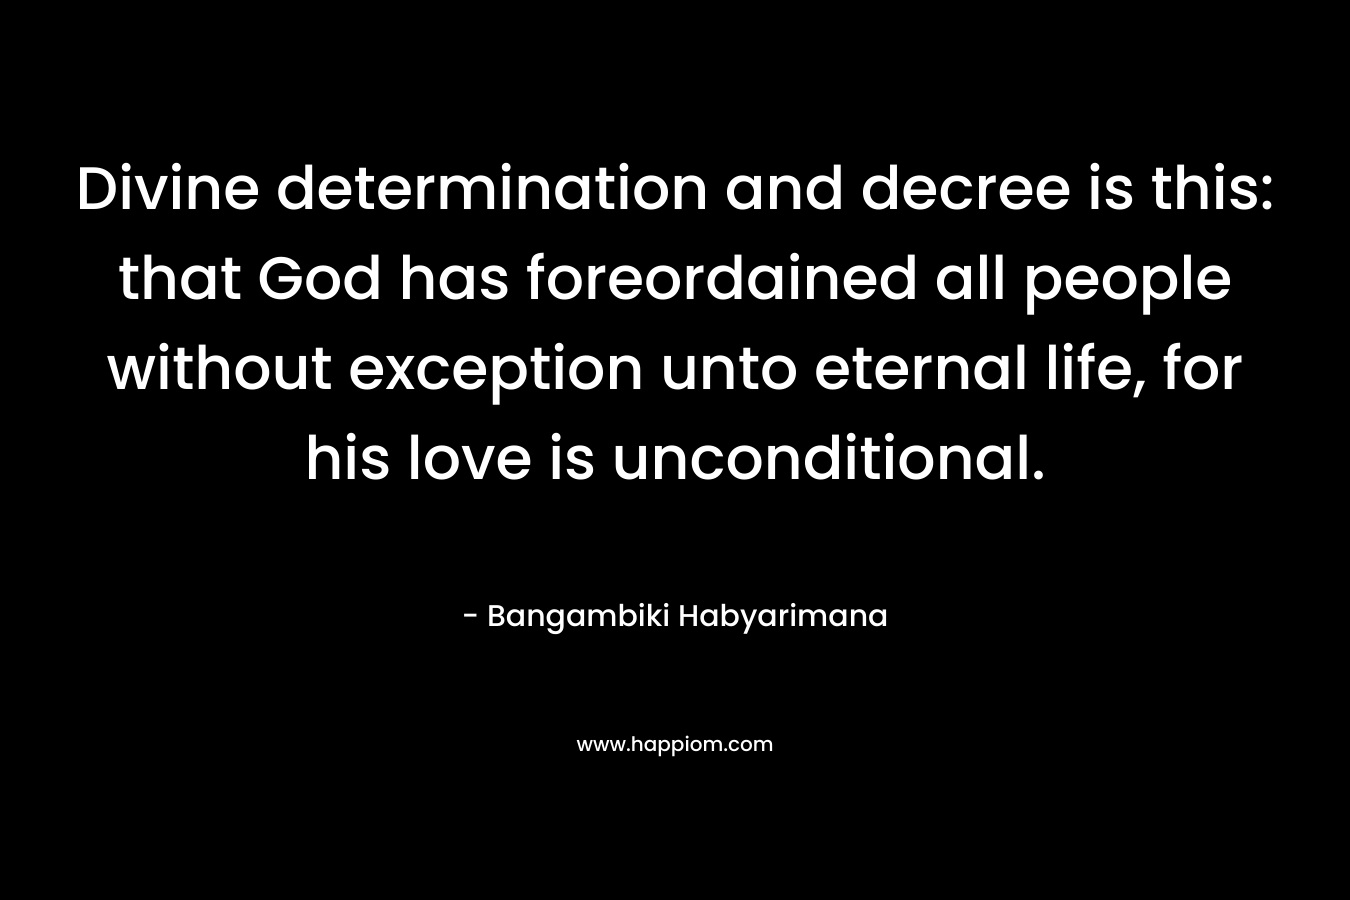 Divine determination and decree is this: that God has foreordained all people without exception unto eternal life, for his love is unconditional.